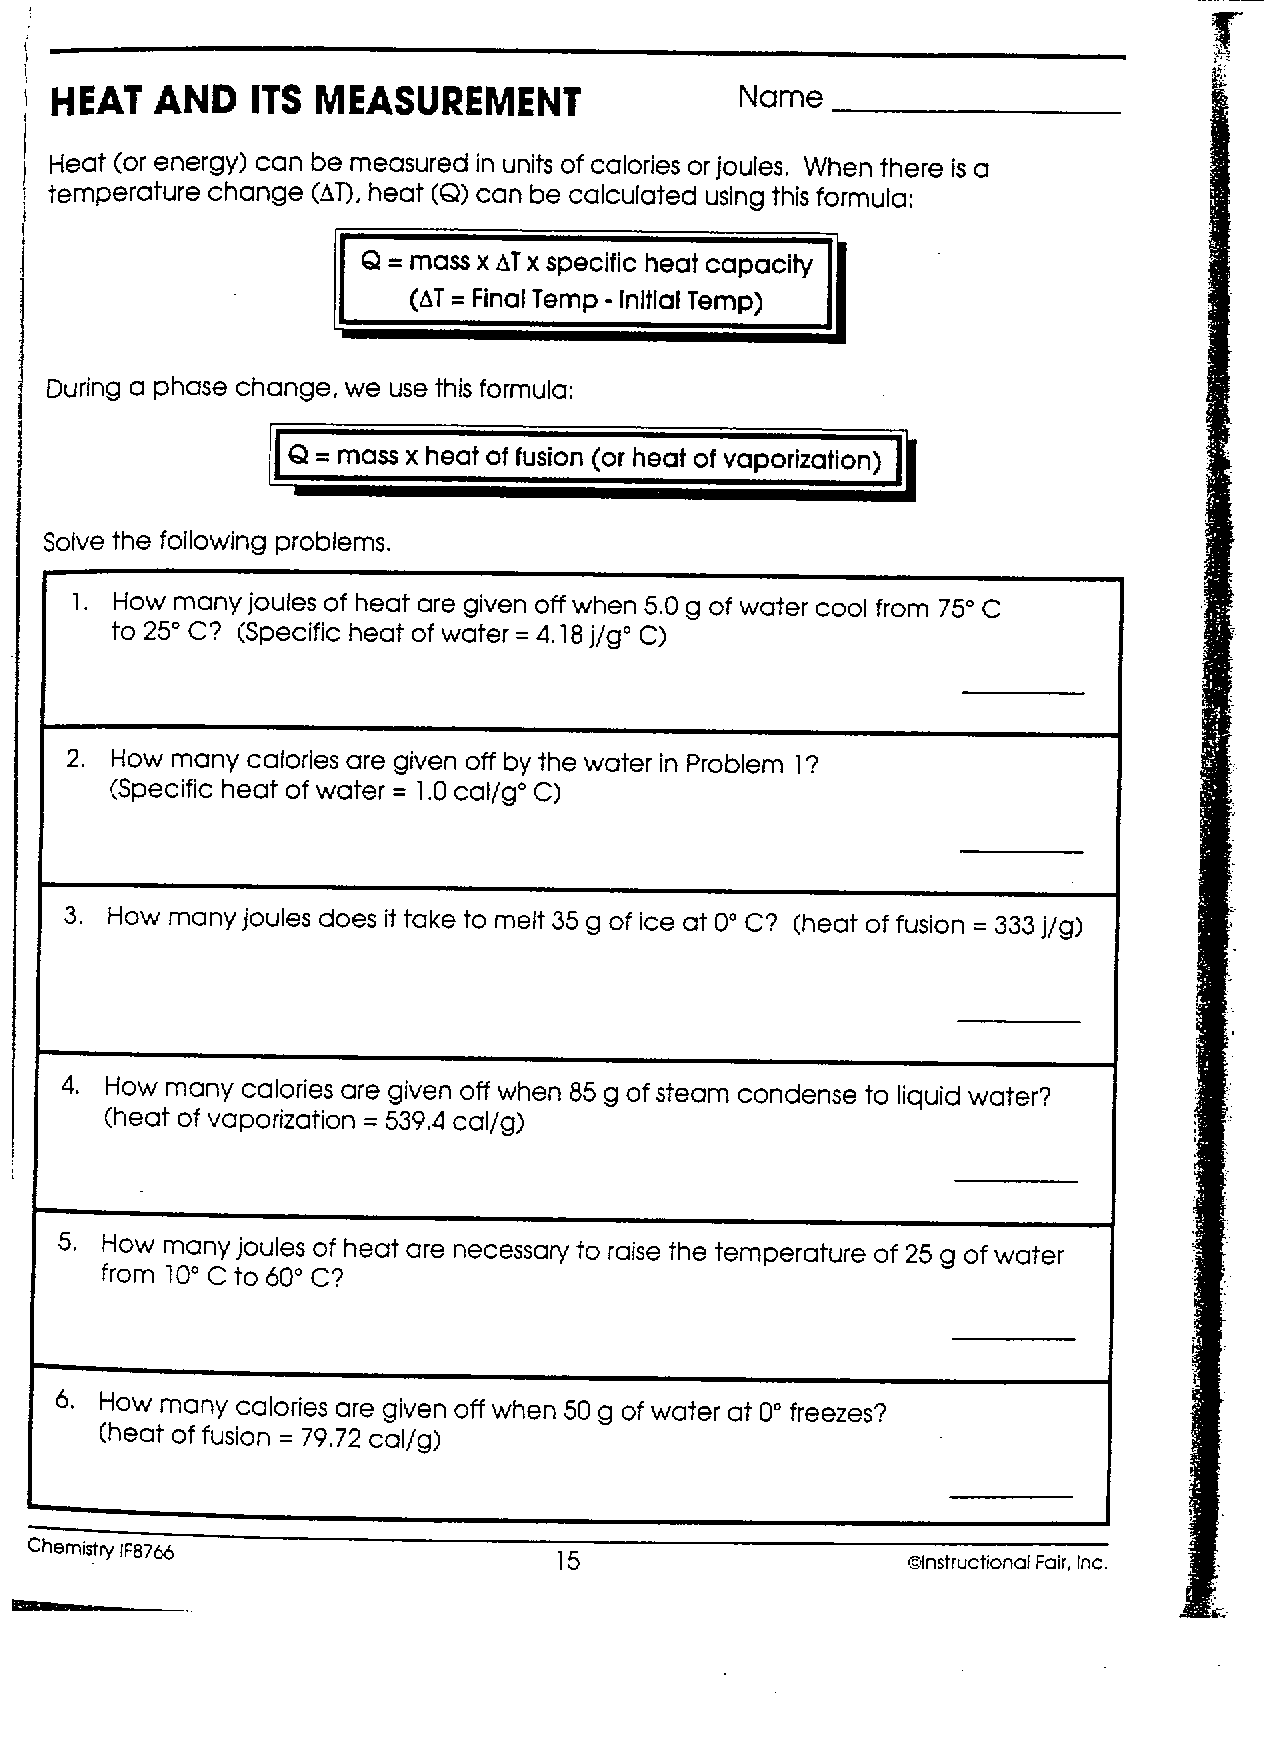 Heat And Its Measurement Worksheet Answers